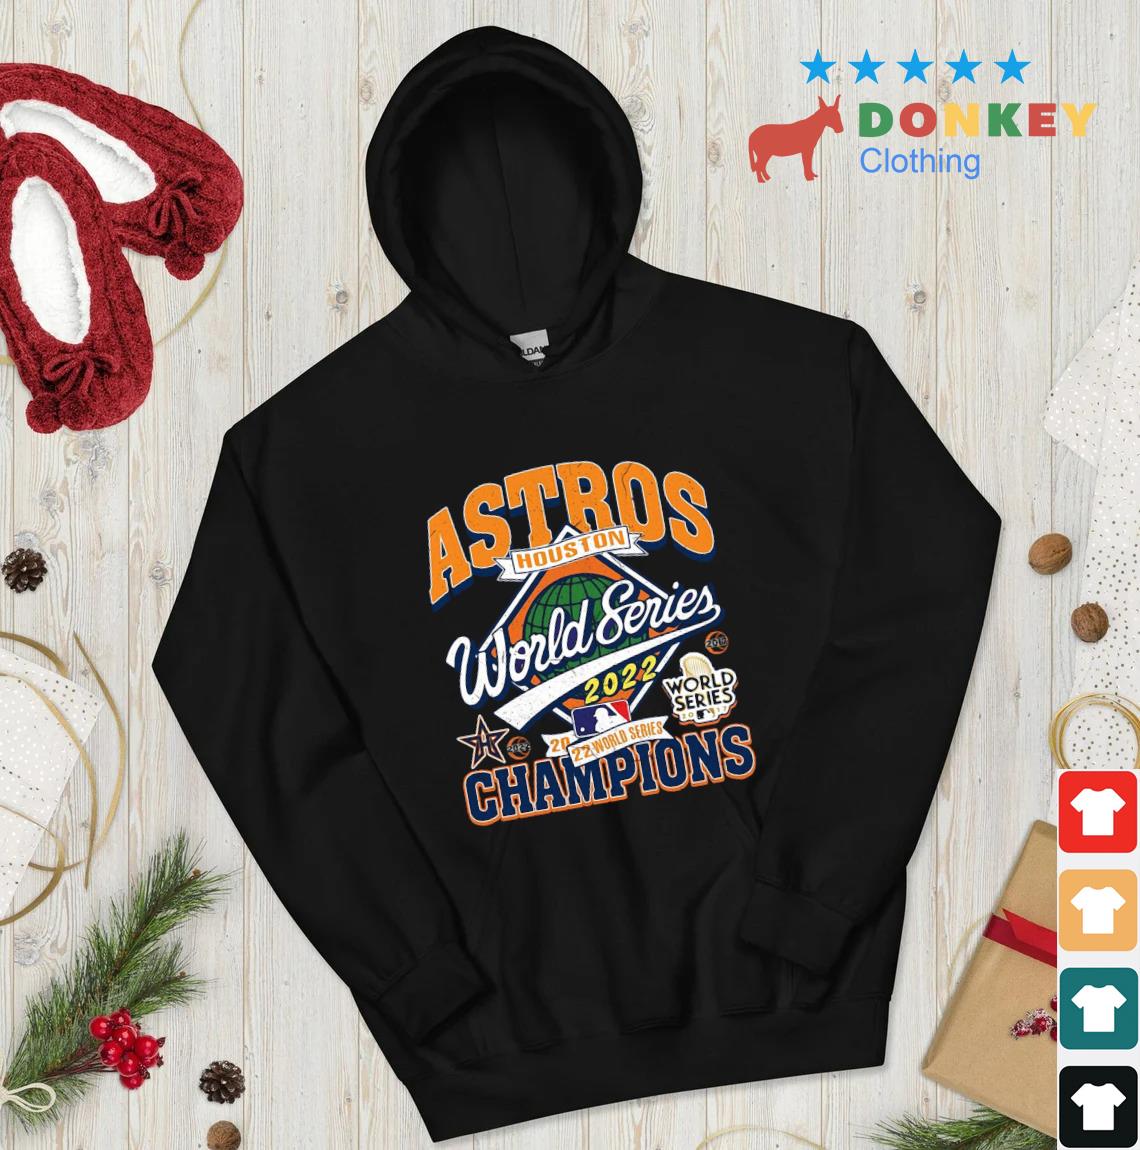 Vintage Houston Astros Styles 90s Houston Astros World Series 2022 Champion  Houston Space City Shirt,Sweater, Hoodie, And Long Sleeved, Ladies, Tank Top